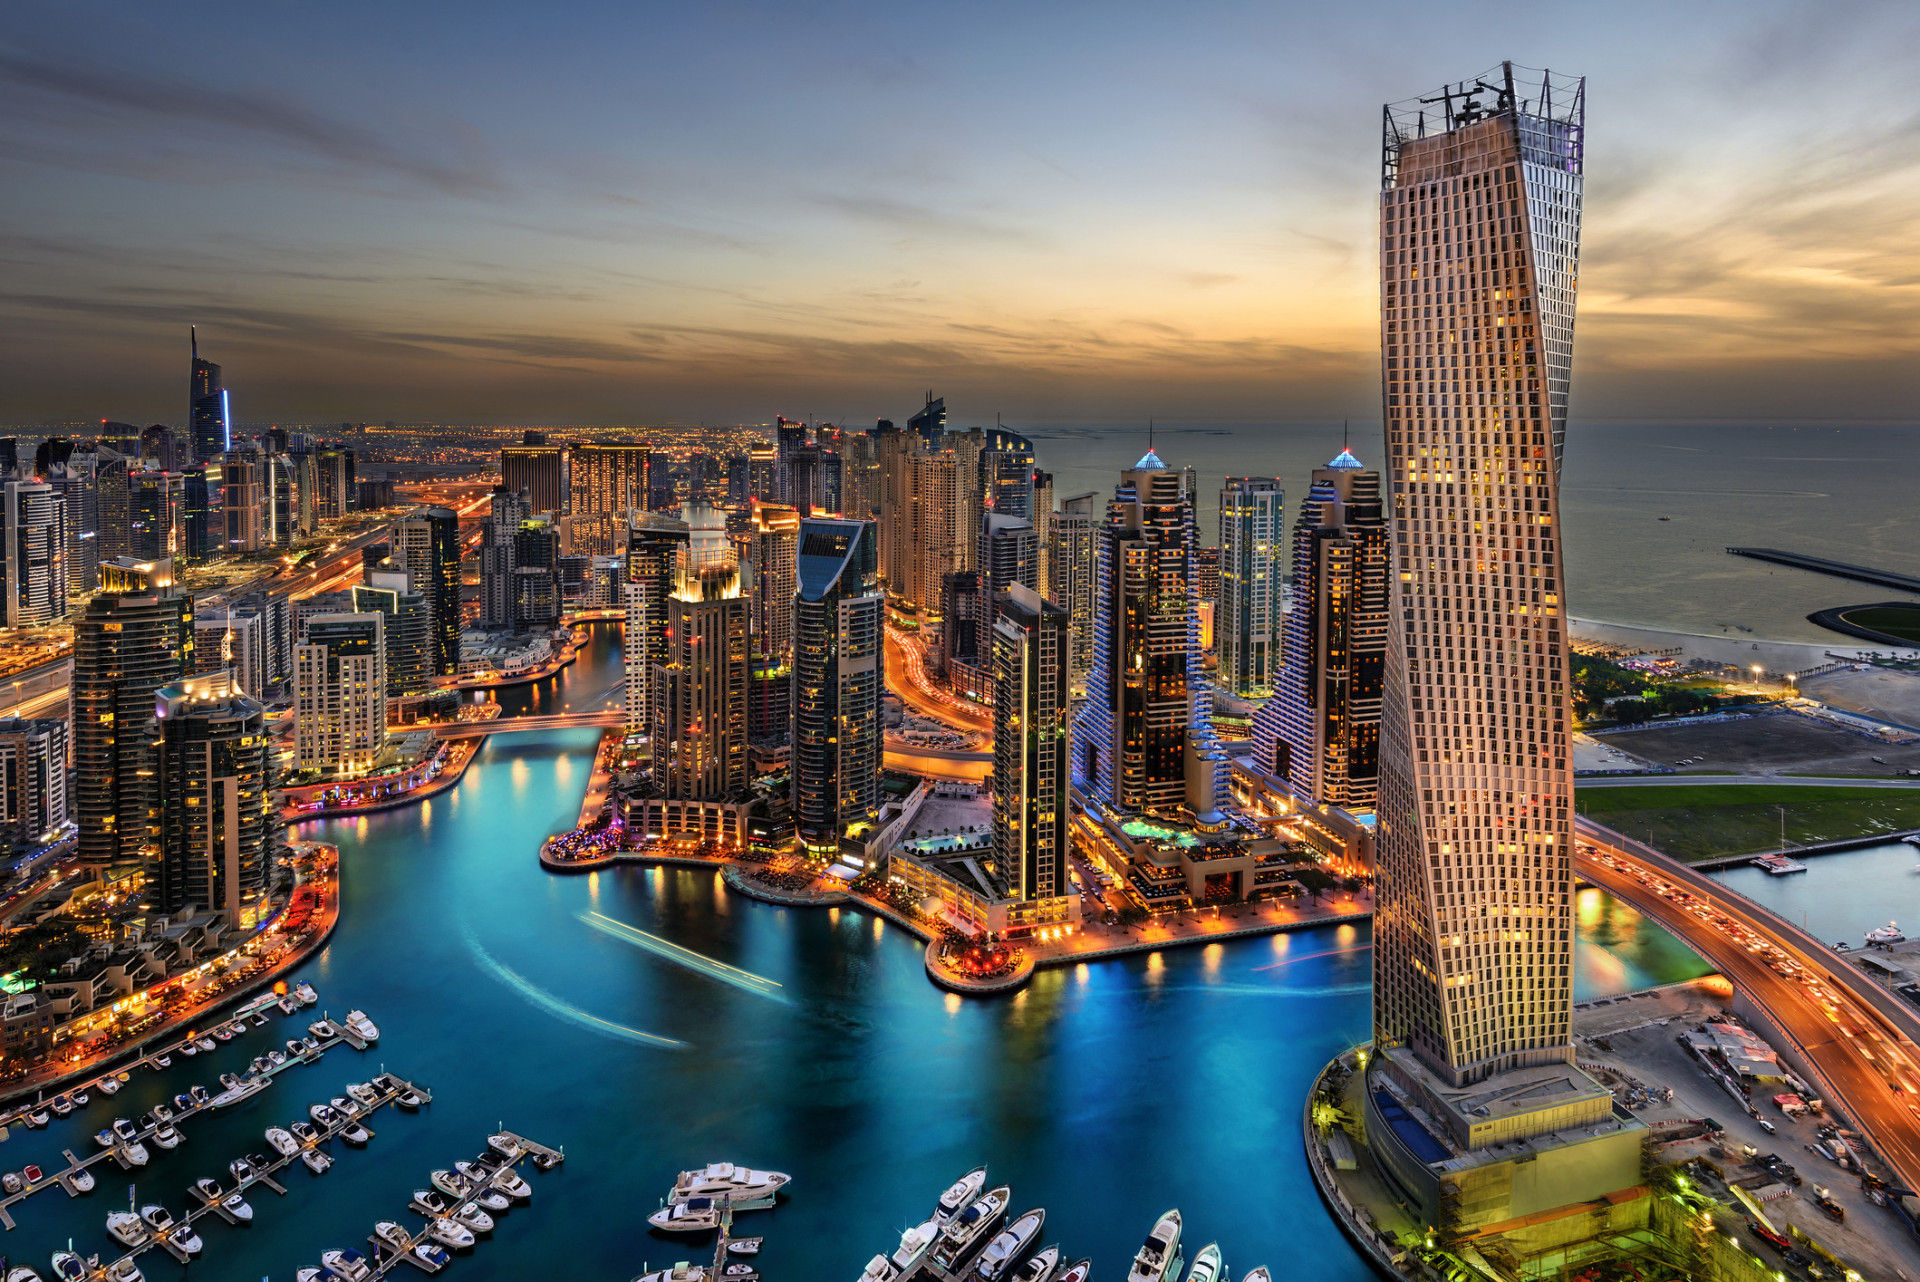 Today Dubai is famously wealthy and home to some of the world's tallest skyscrapers.<p>You may also like:<a href="https://www.starsinsider.com/n/283175?utm_source=msn.com&utm_medium=display&utm_campaign=referral_description&utm_content=292997v1en-us"> ‘Snake Island’: Meet the world's deadliest place</a></p>